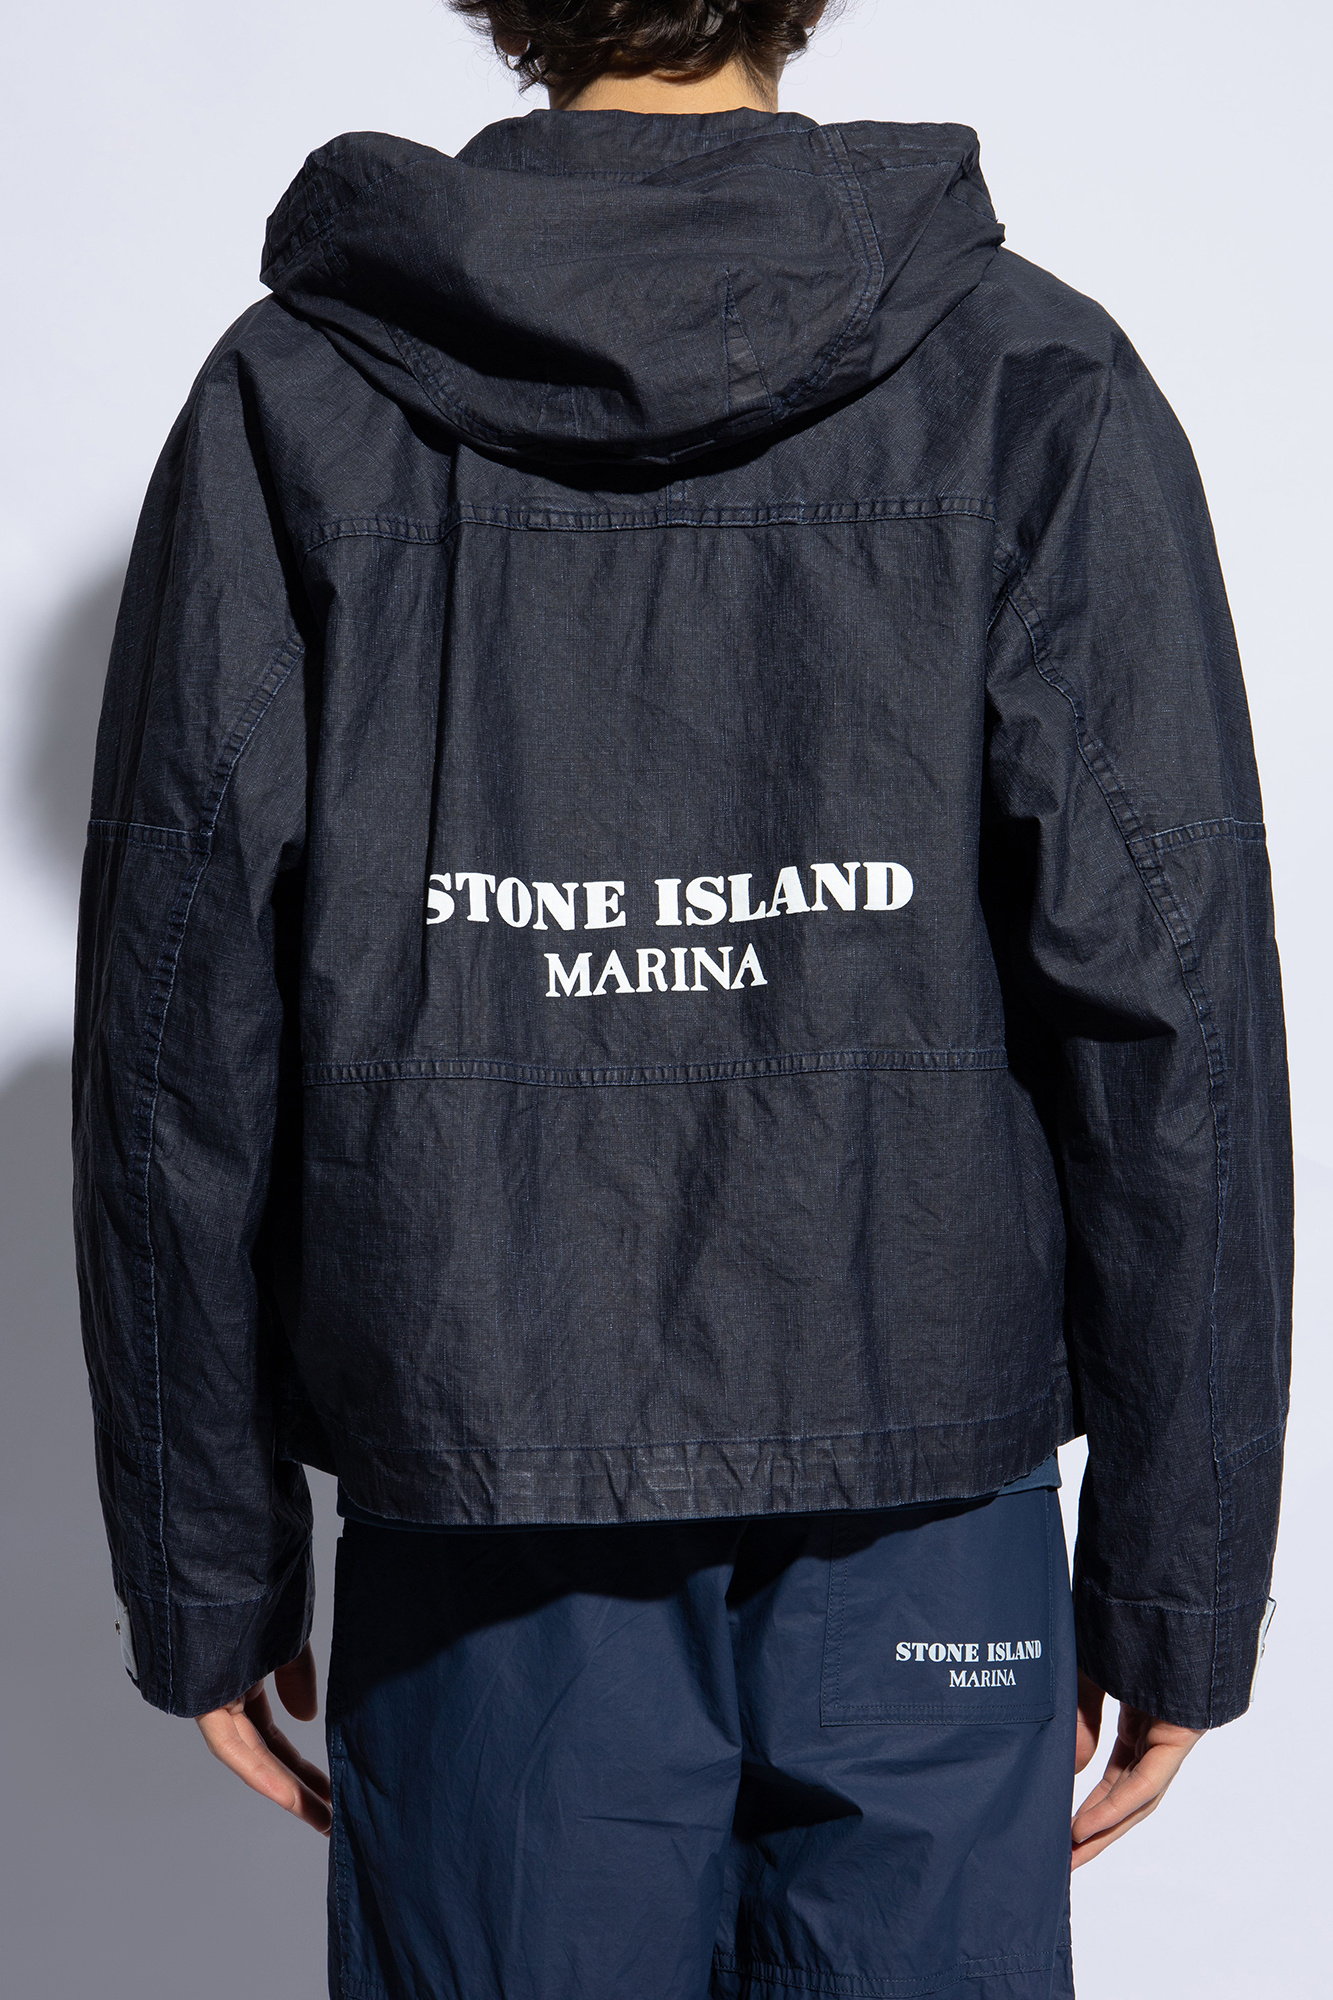 Stone Island Linen jacket from the 'Marina' collection | Men's 